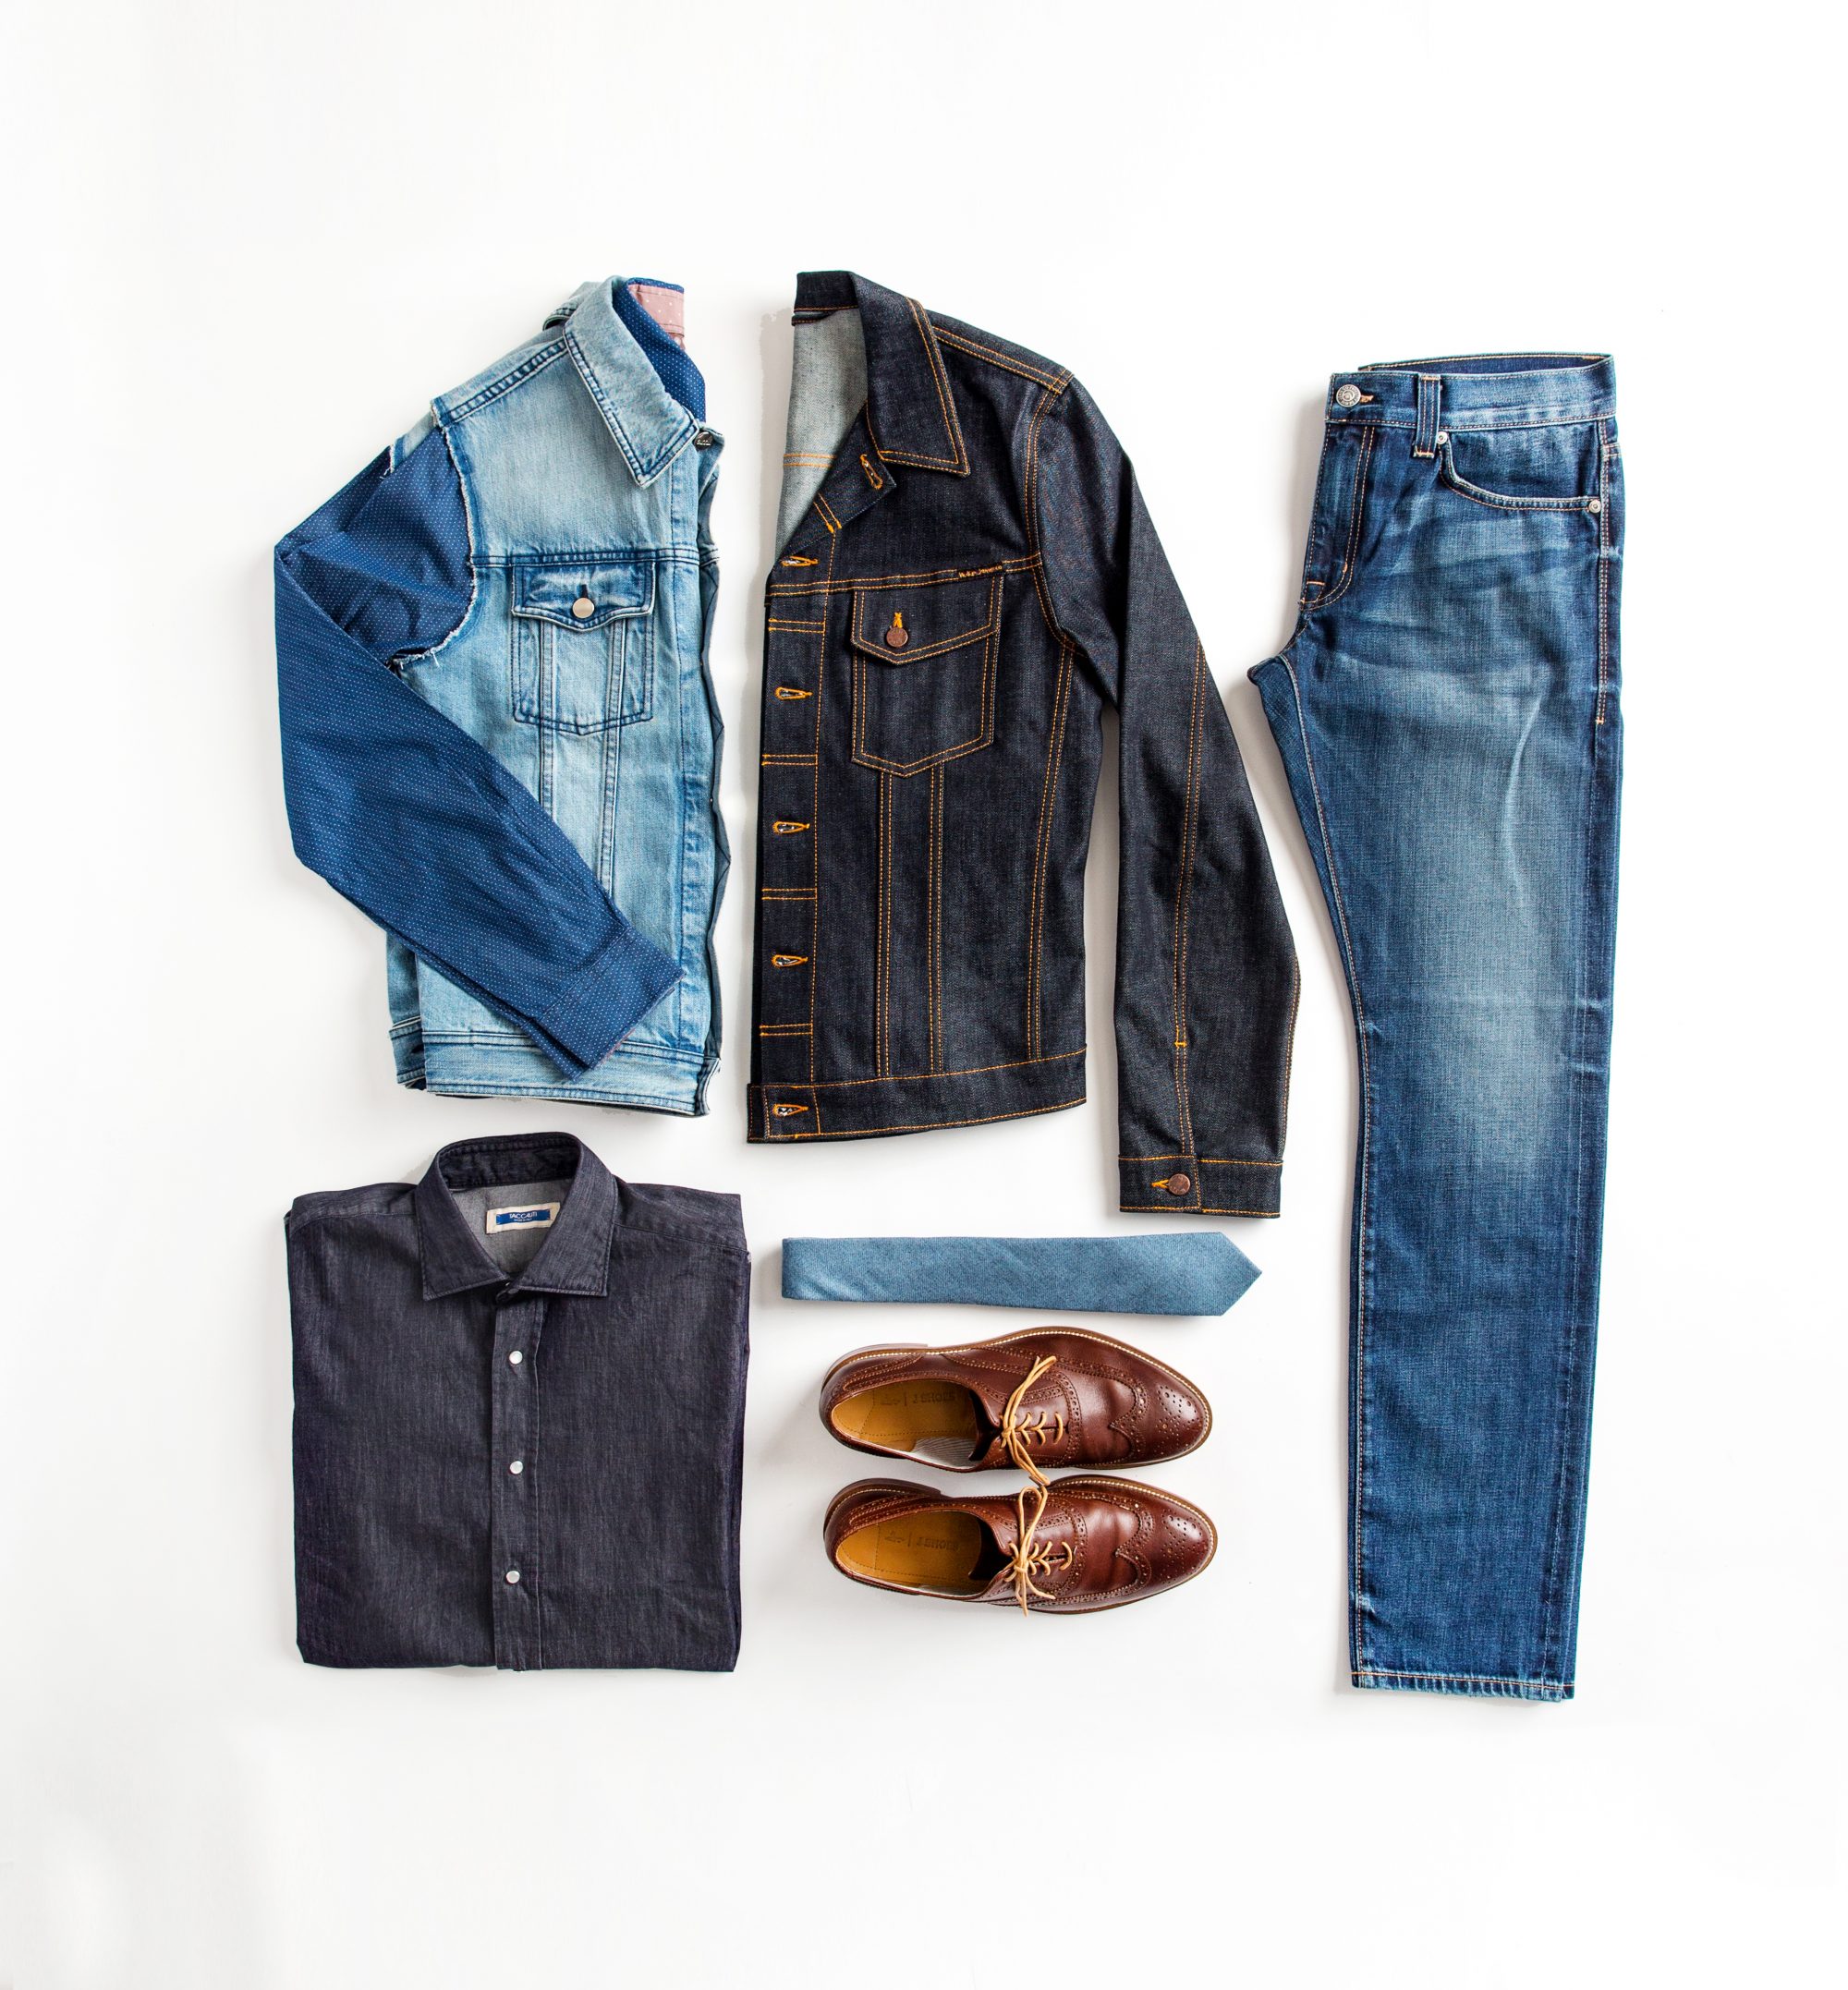 Outfit Grid (Clockwise top left): Matinique micro dot shirt, $129, from Jaisel, AMI vest, $385, The Helm, Nudie Jeans jacket, $199, from Jaisel, Fidelity Denim jeans, $289, from Derks, Glendon Lambert tie, $99, from Derks, J. Shoes shoes, $199, from Jaisel, Taccaliti shirt, $225, from The Helm.